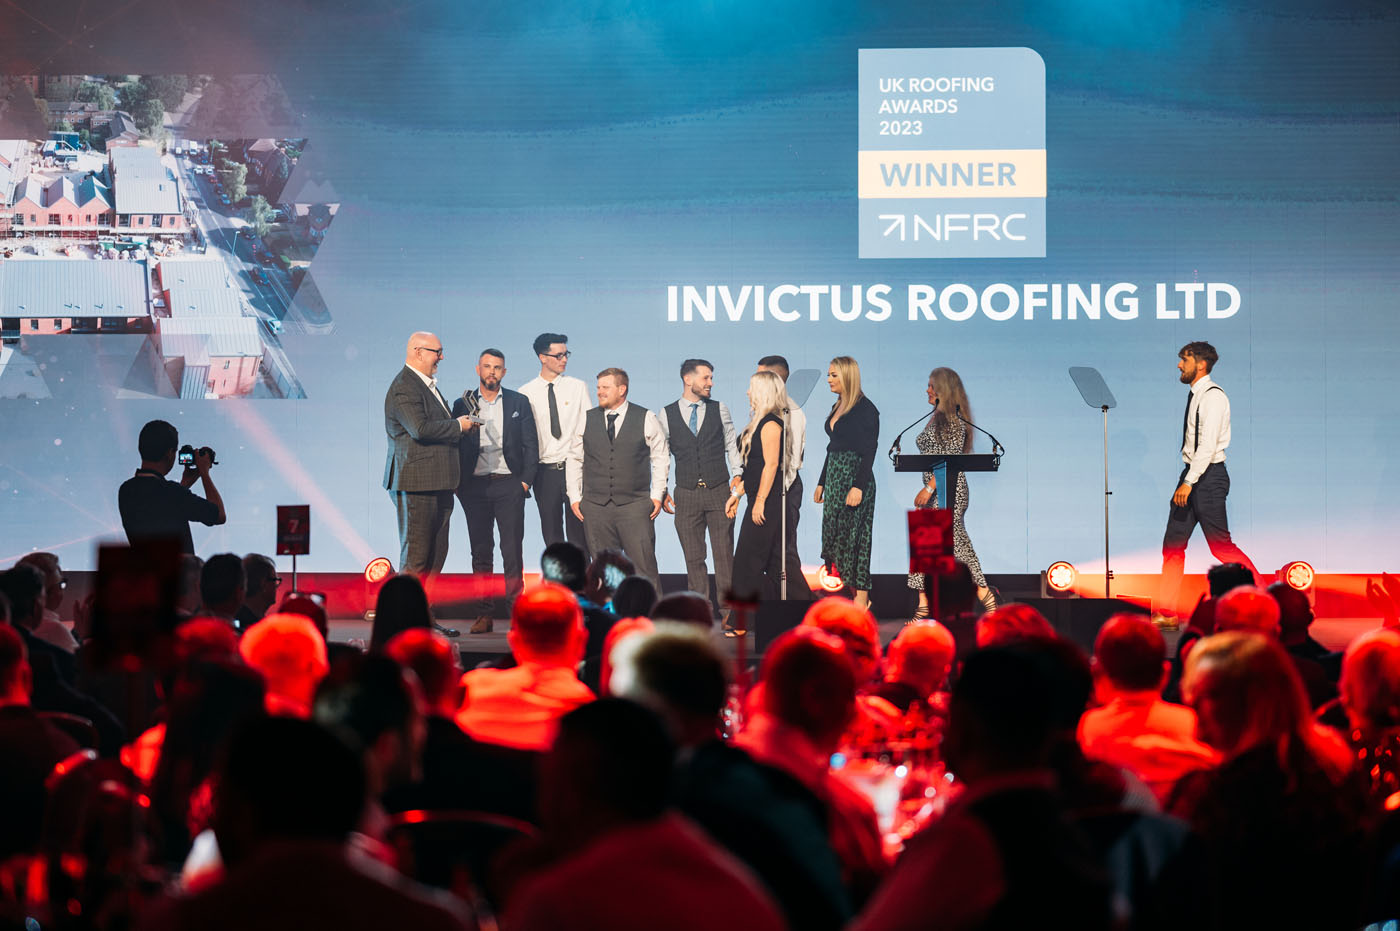 Single-Ply Roofing winner Invictus Roofing